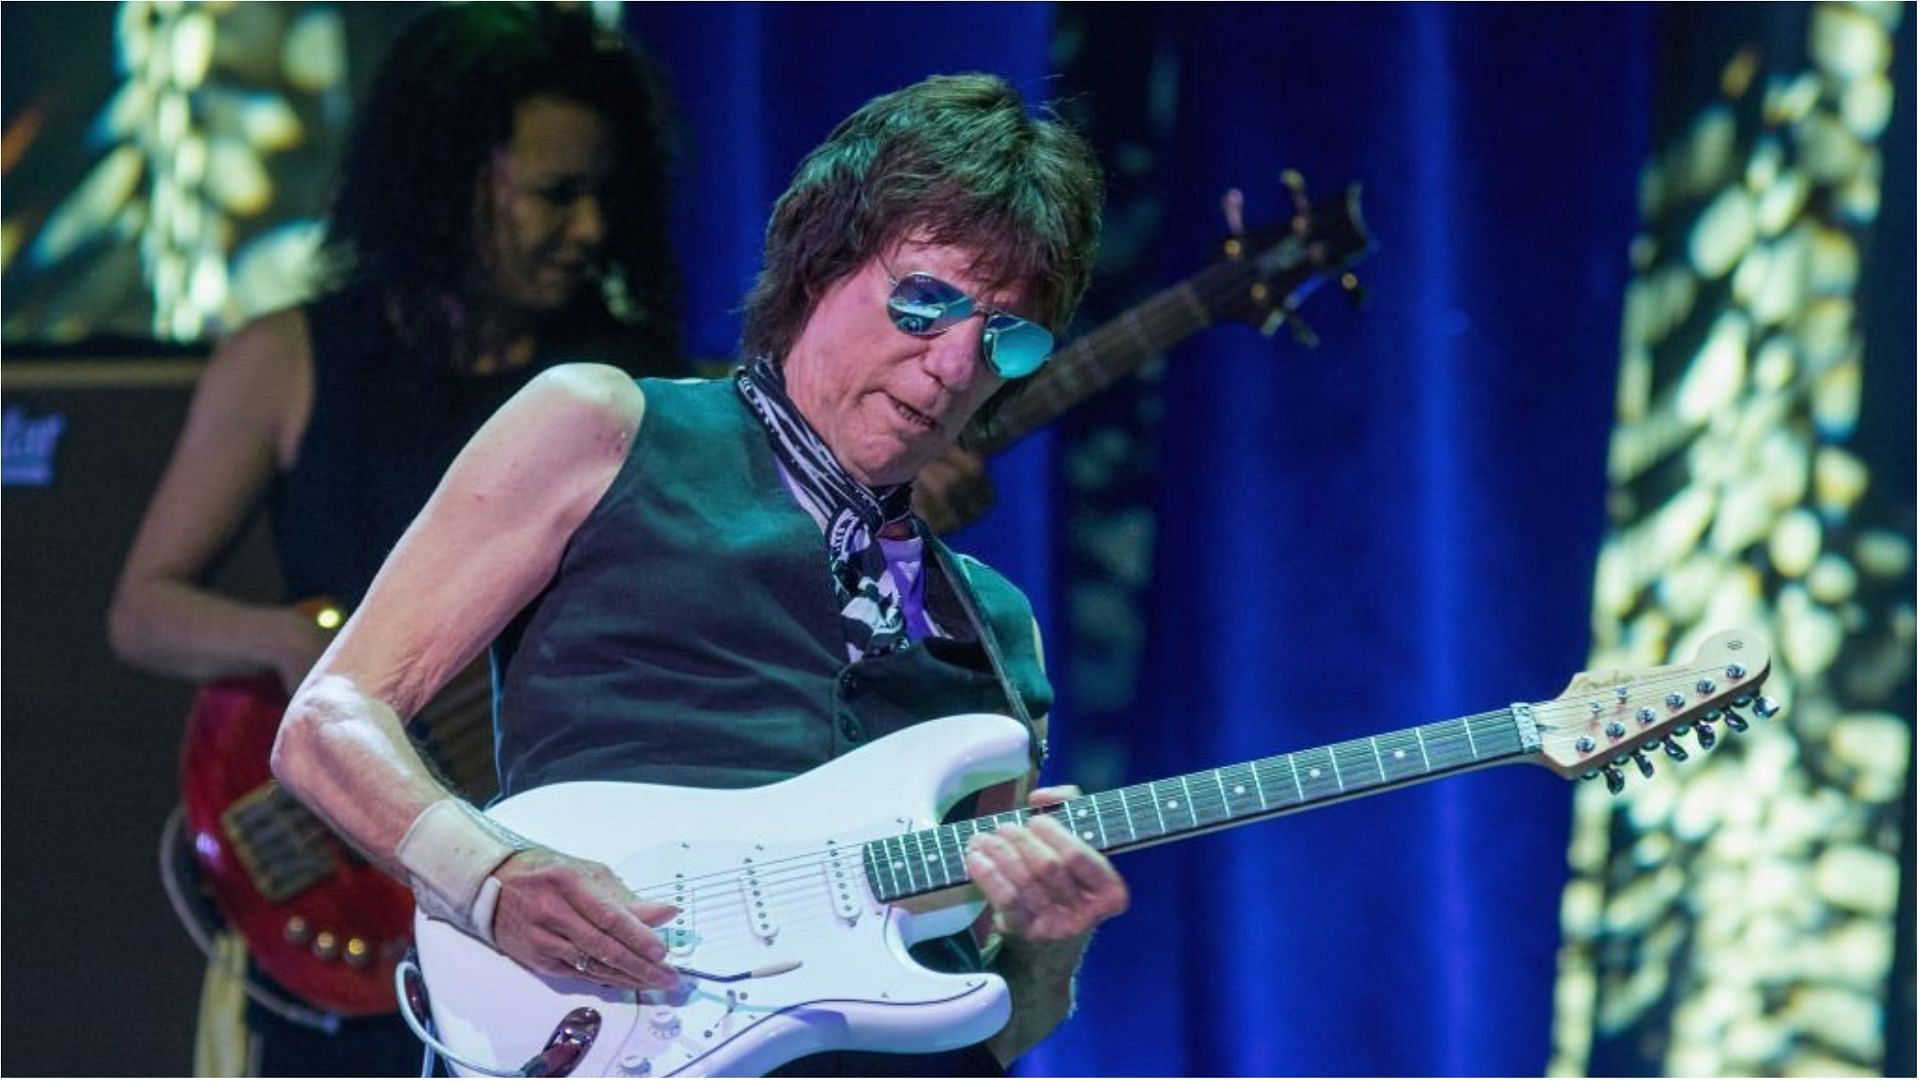 Jeff Beck recently died at the age of 78 (Image via Rick Kern/Getty Images)